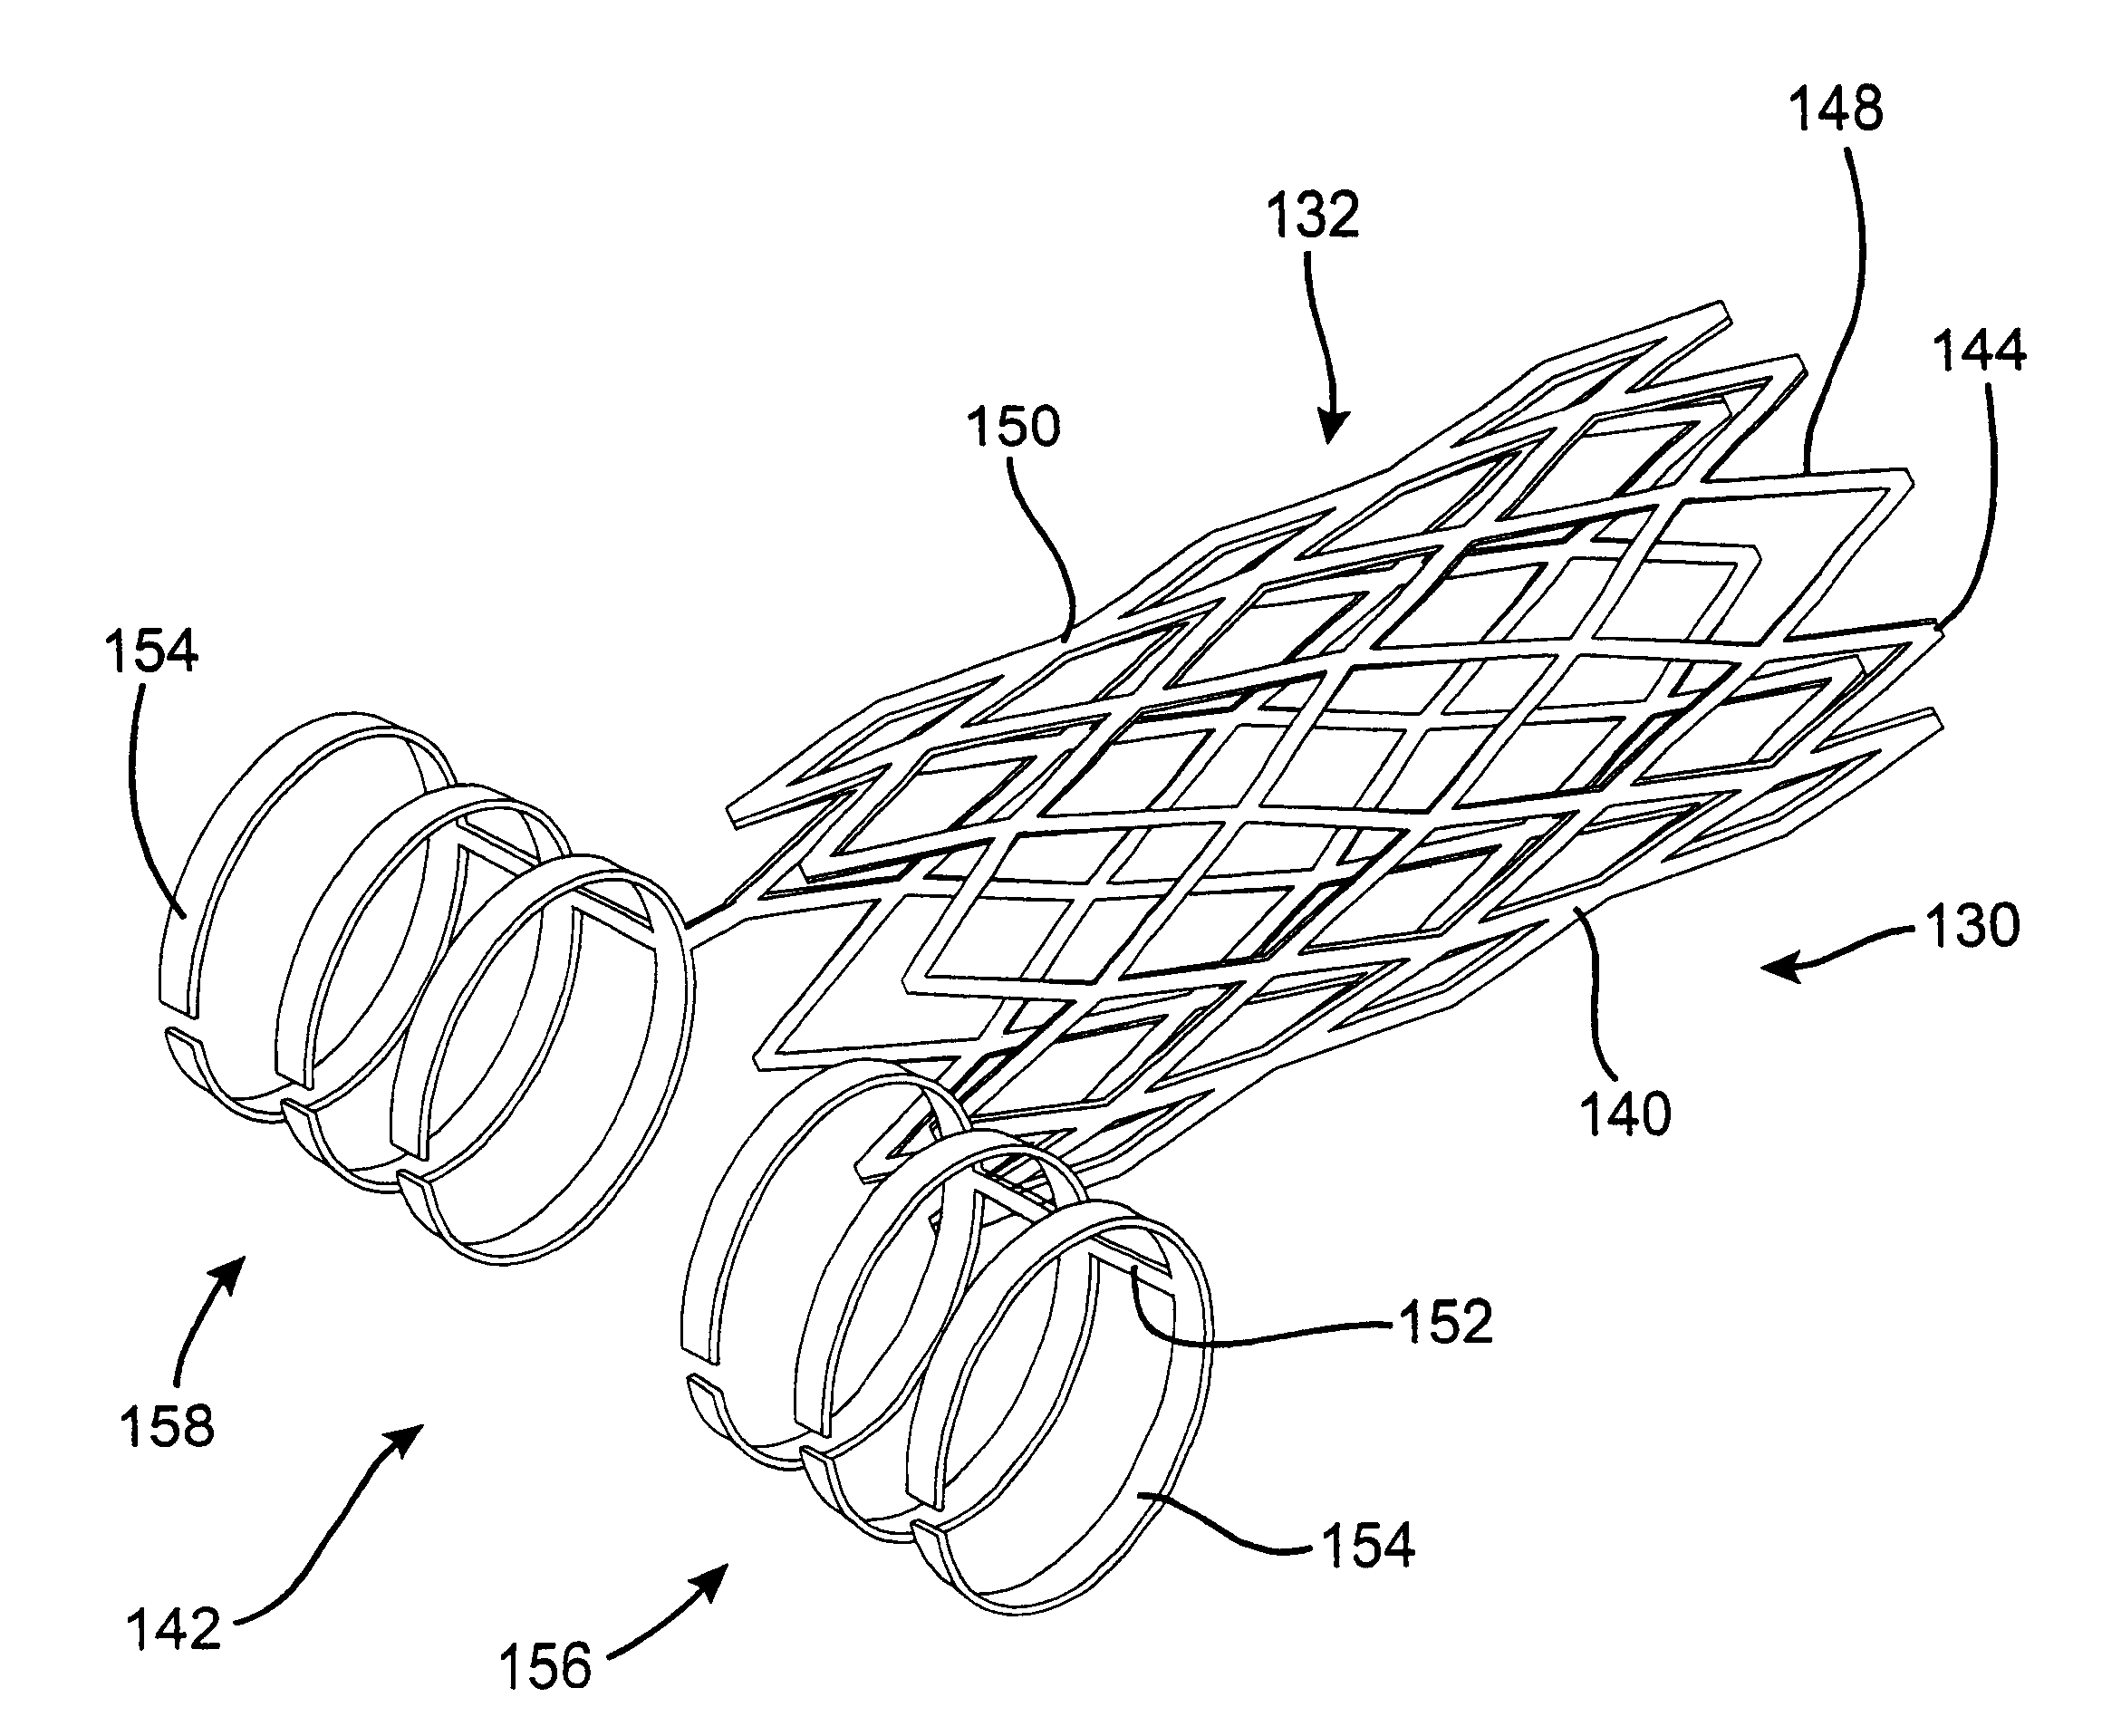 Methods and devices for forming vascular anastomoses